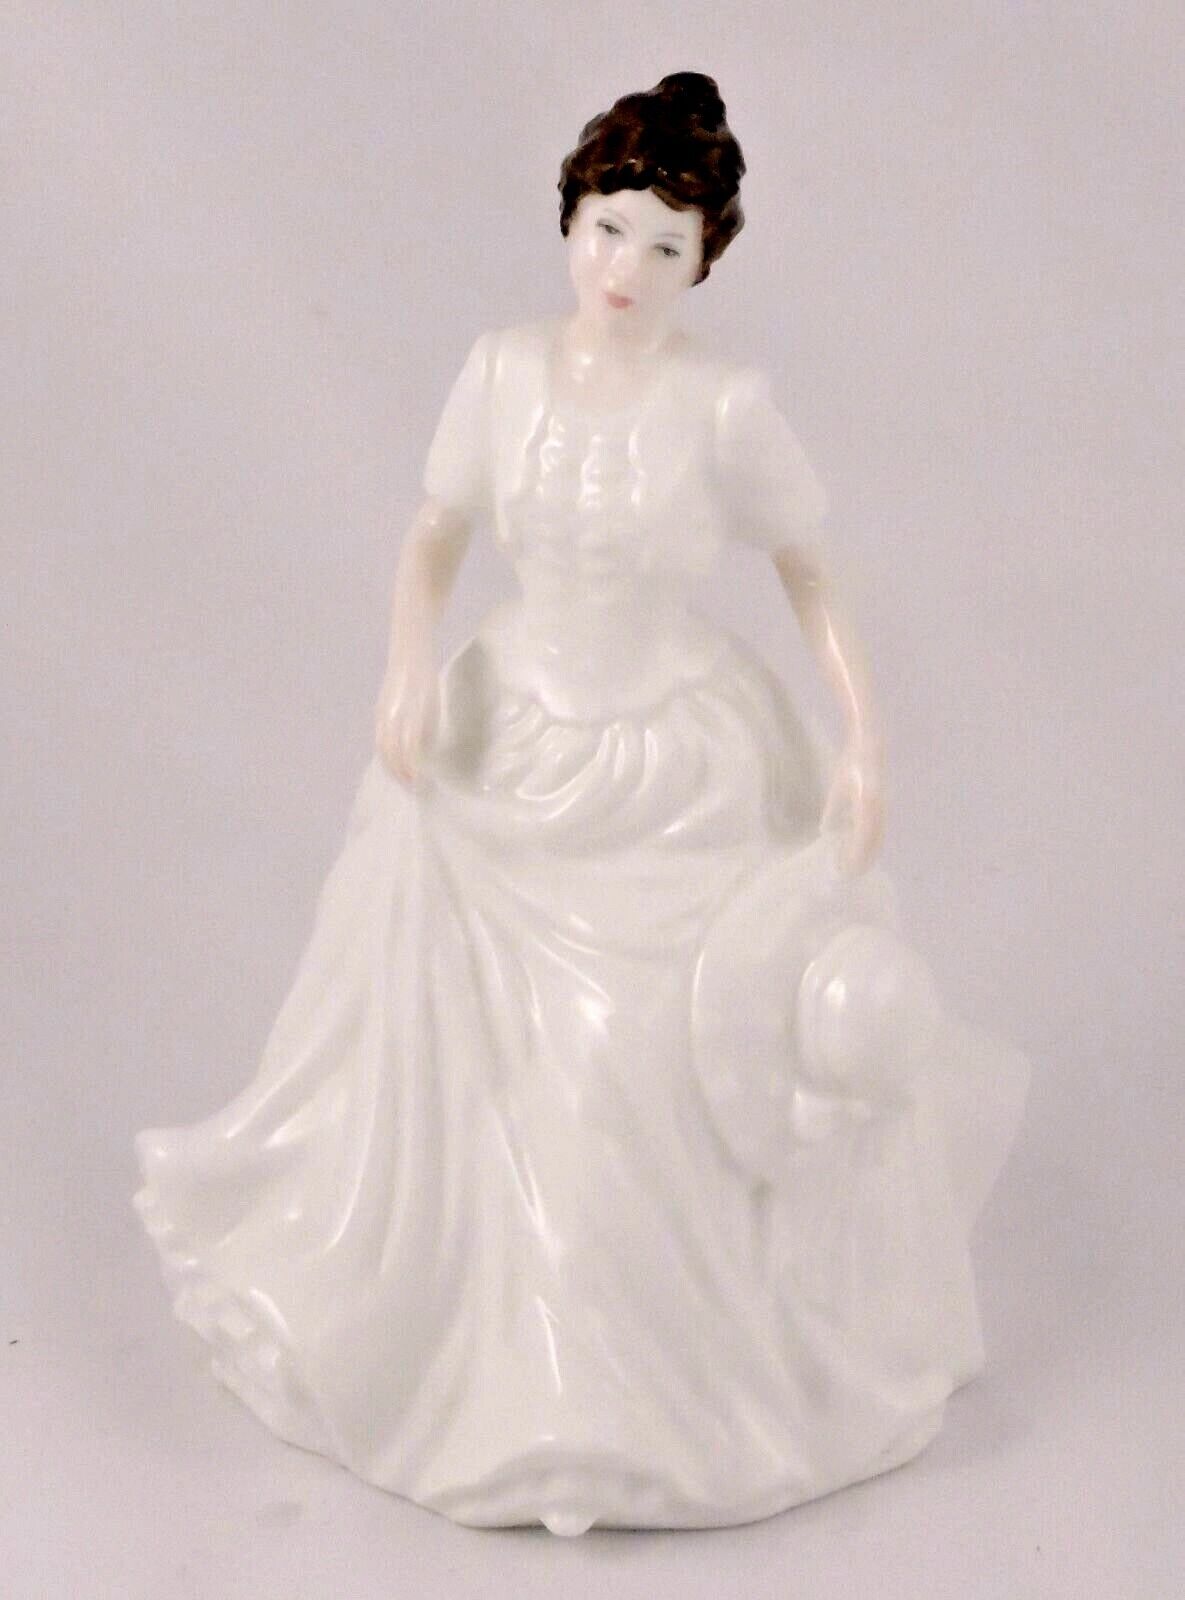 Royal Doulton Figurine Harmony Bone China HN4096 Exclusive for Collectors Club